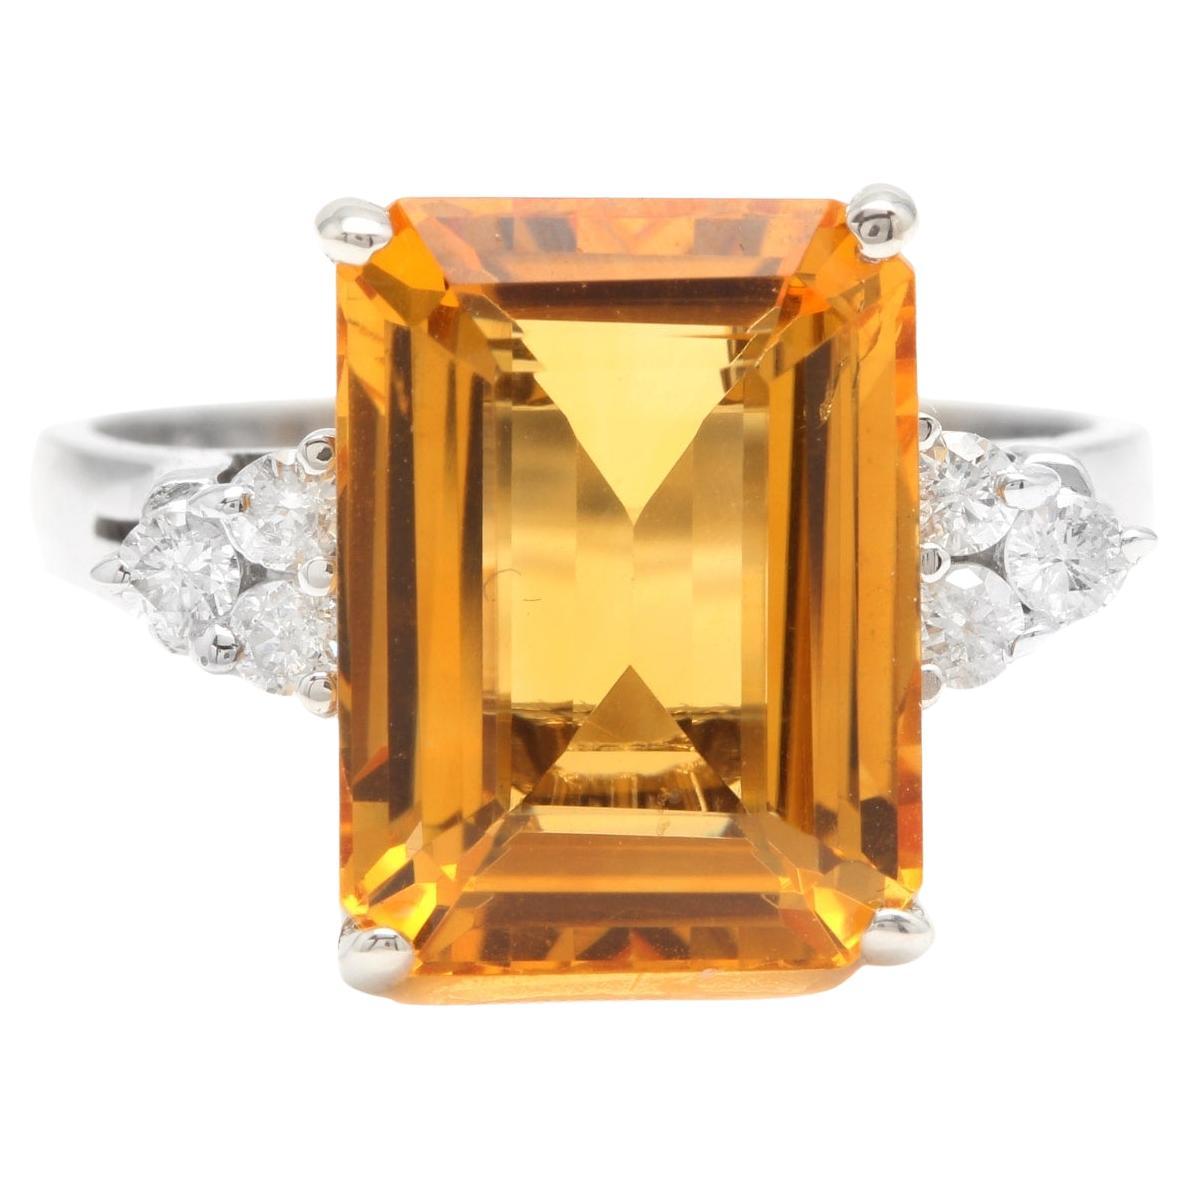 7.35Ct Natural Citrine and Diamond 14K Solid White Gold Ring